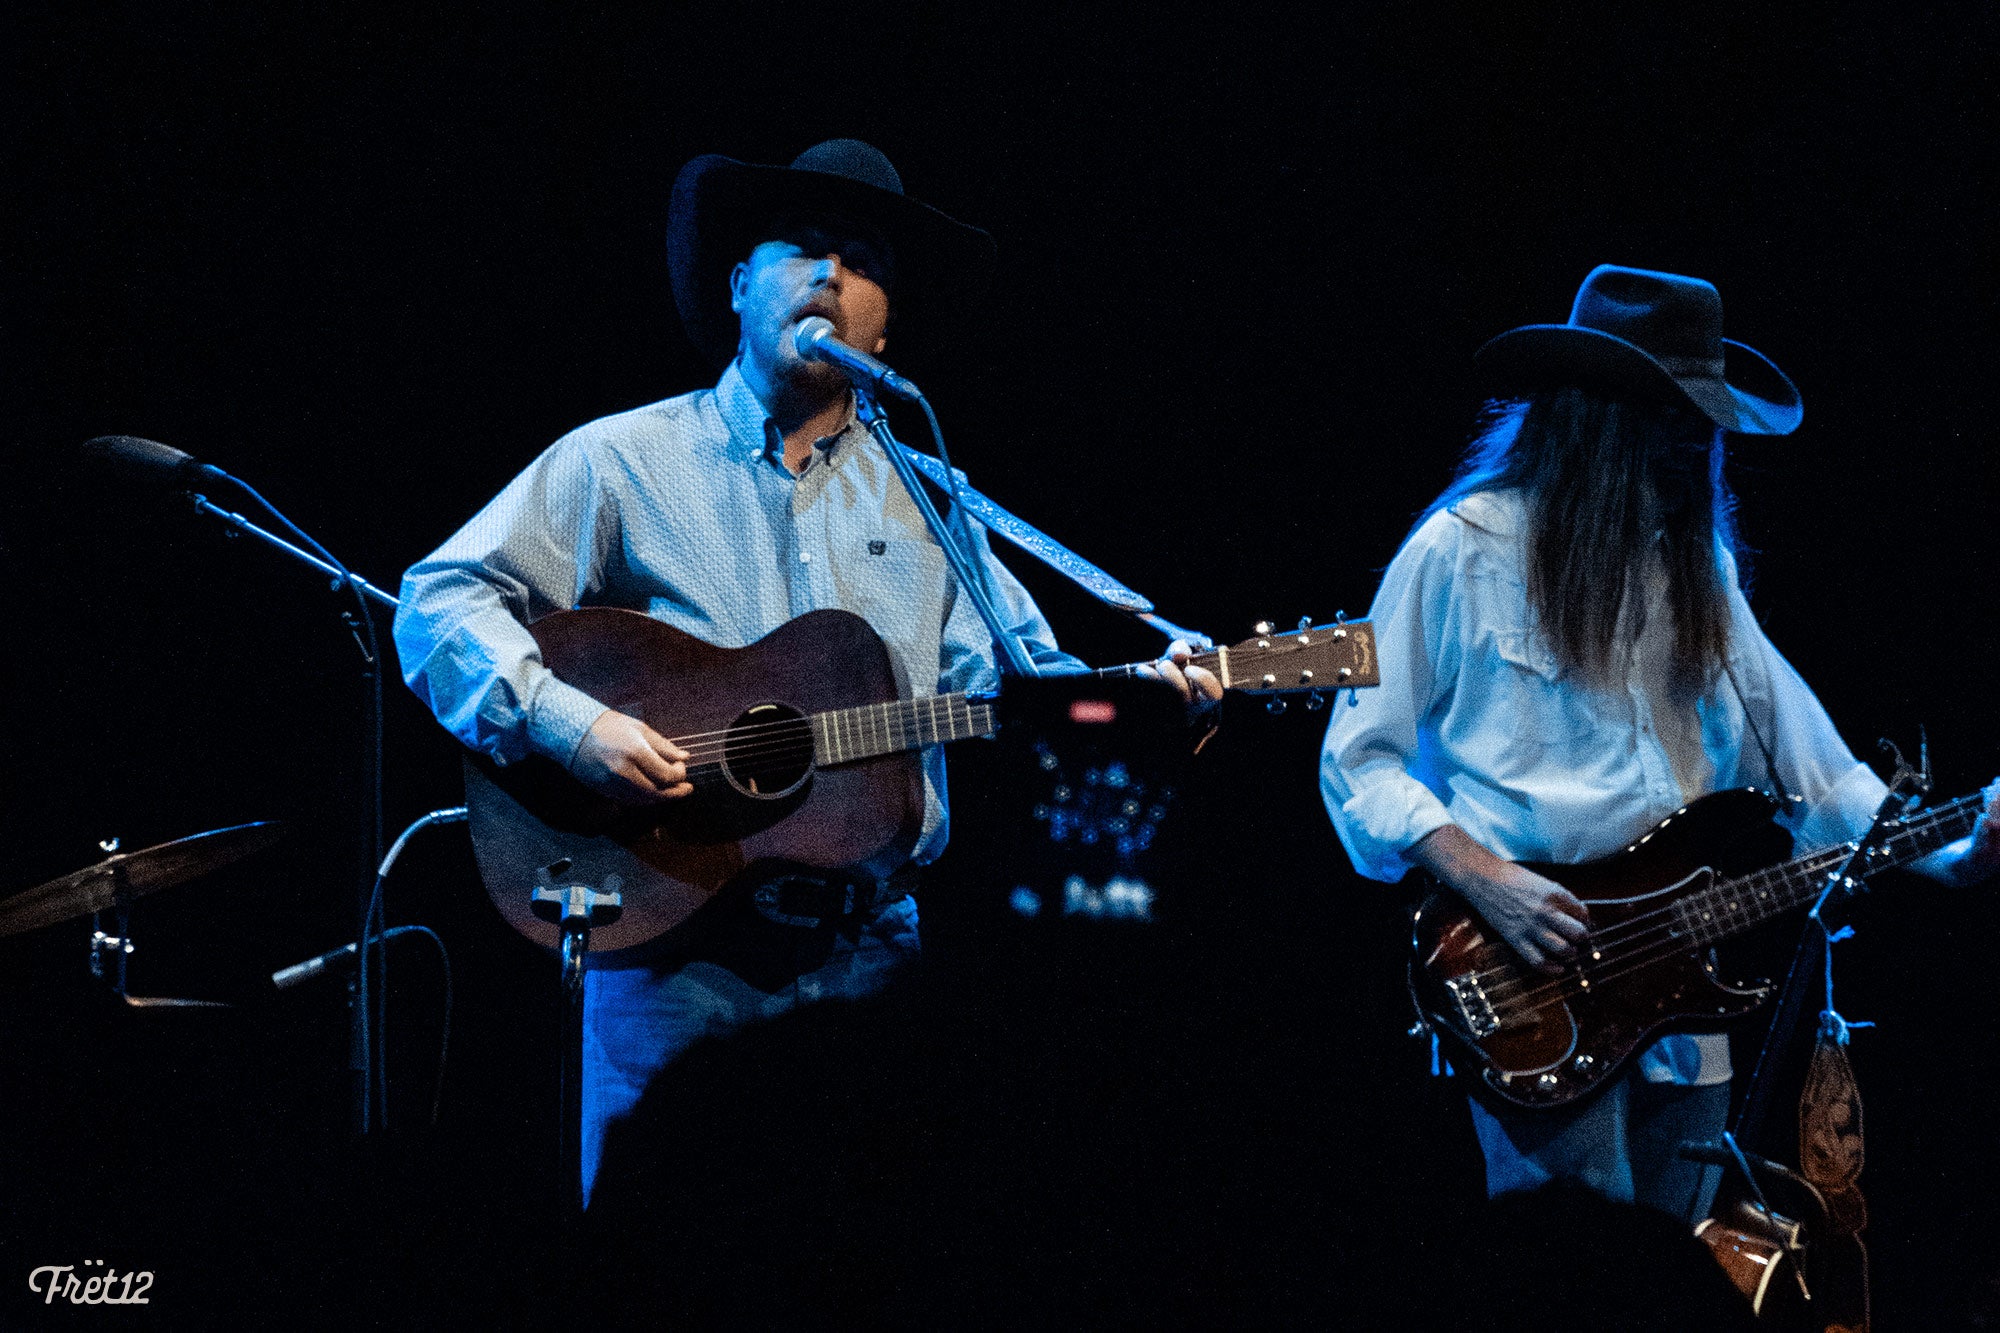 Colter Wall at The Salt Shed - Photos by FRET12